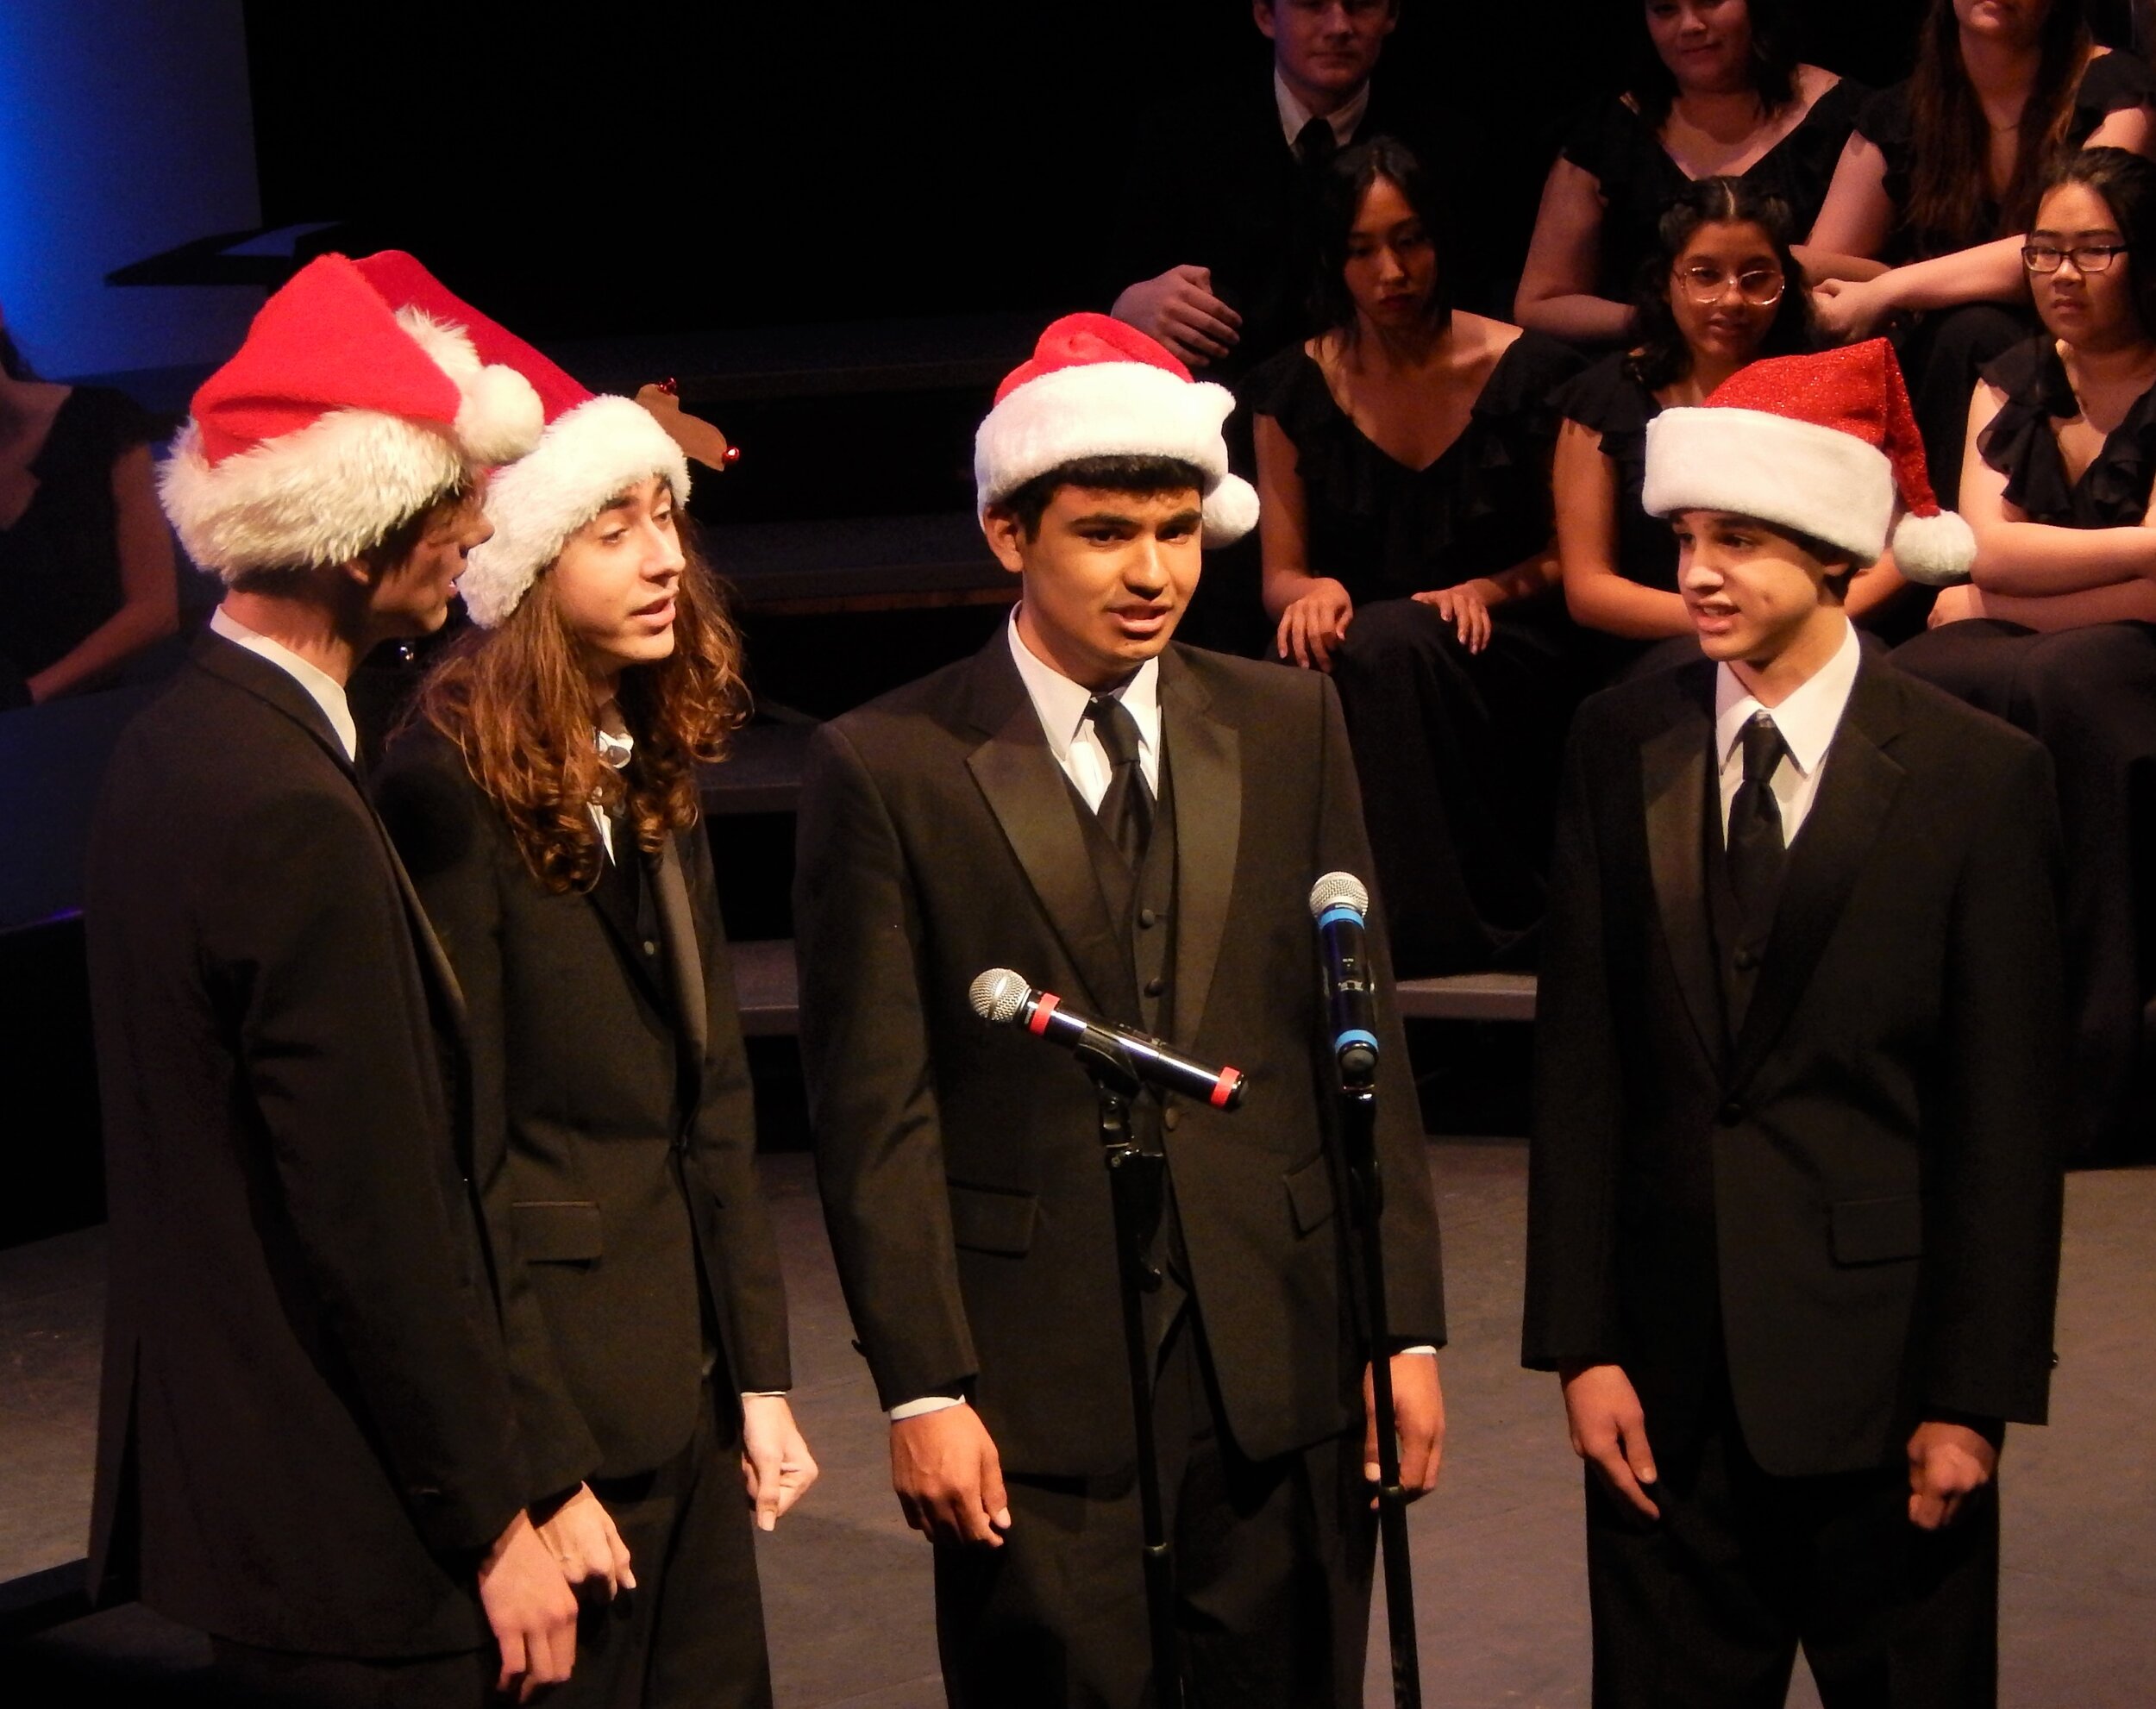 CV's Barbershop Quartet serenades the audience with "Have Yourself A Merry Little Christmas.